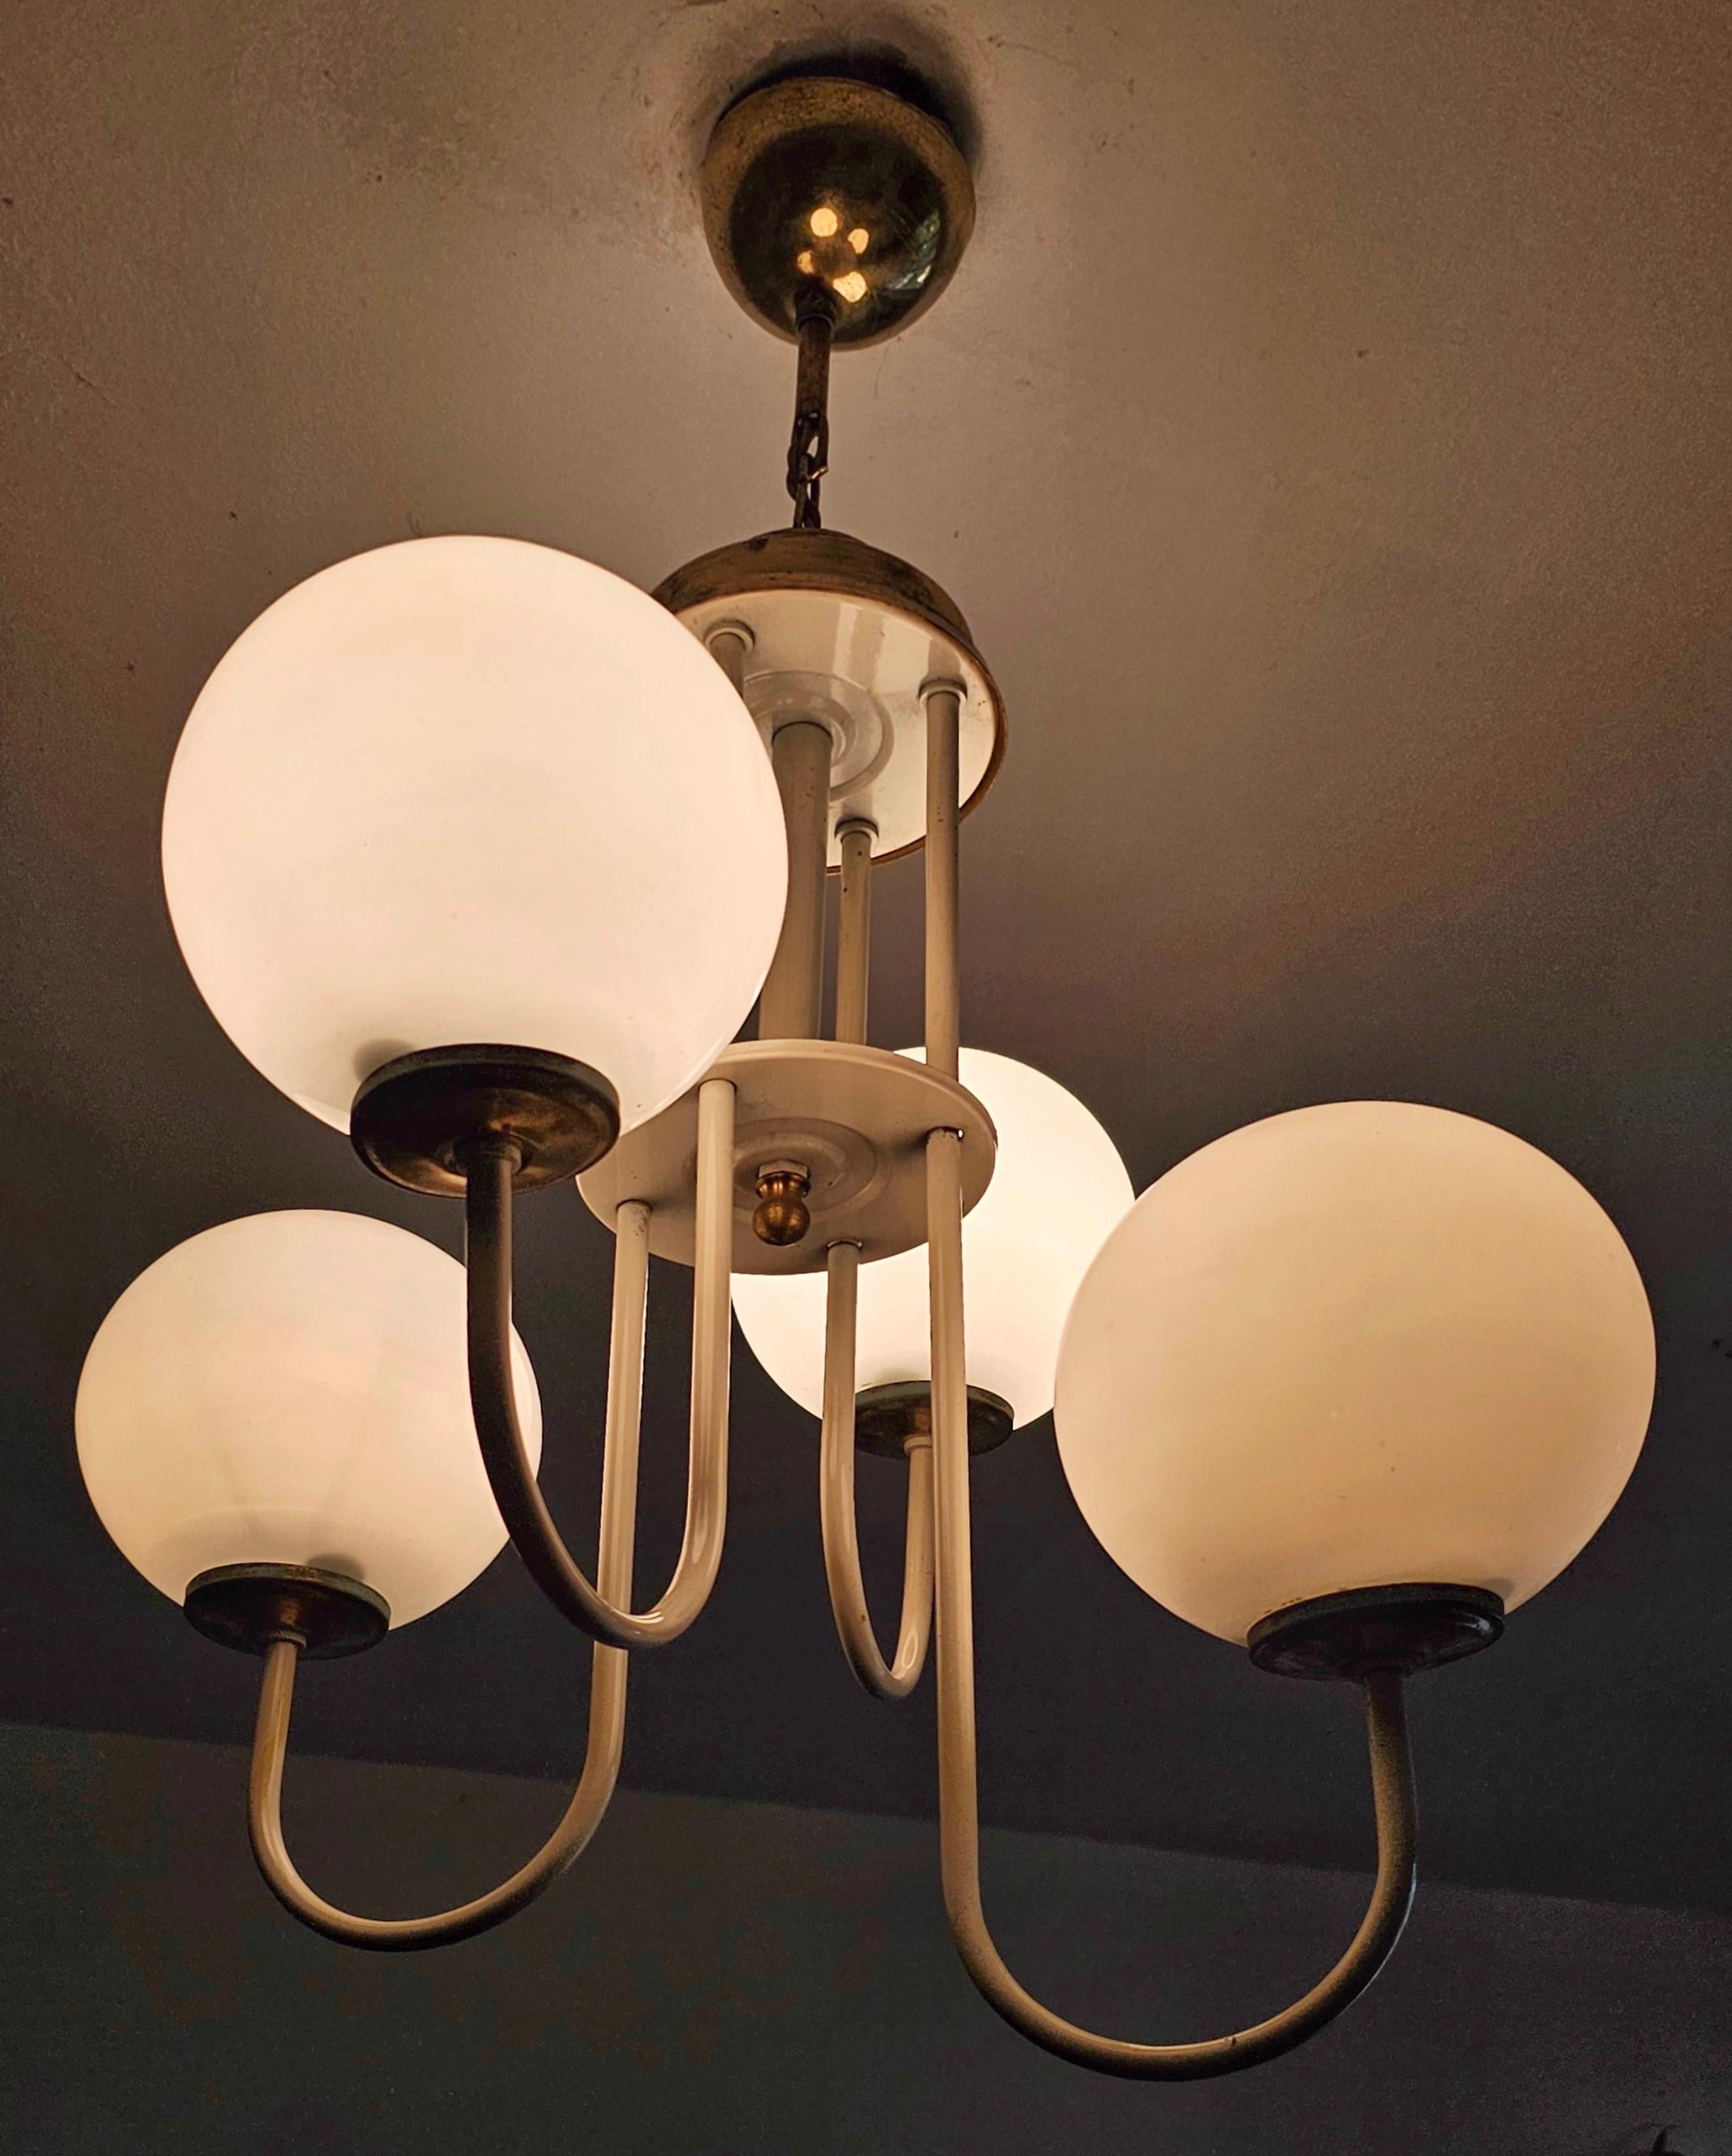 Italian Rare Mid Century Modern Chandelier with Opaline Glass Balls, Italy 1960s For Sale